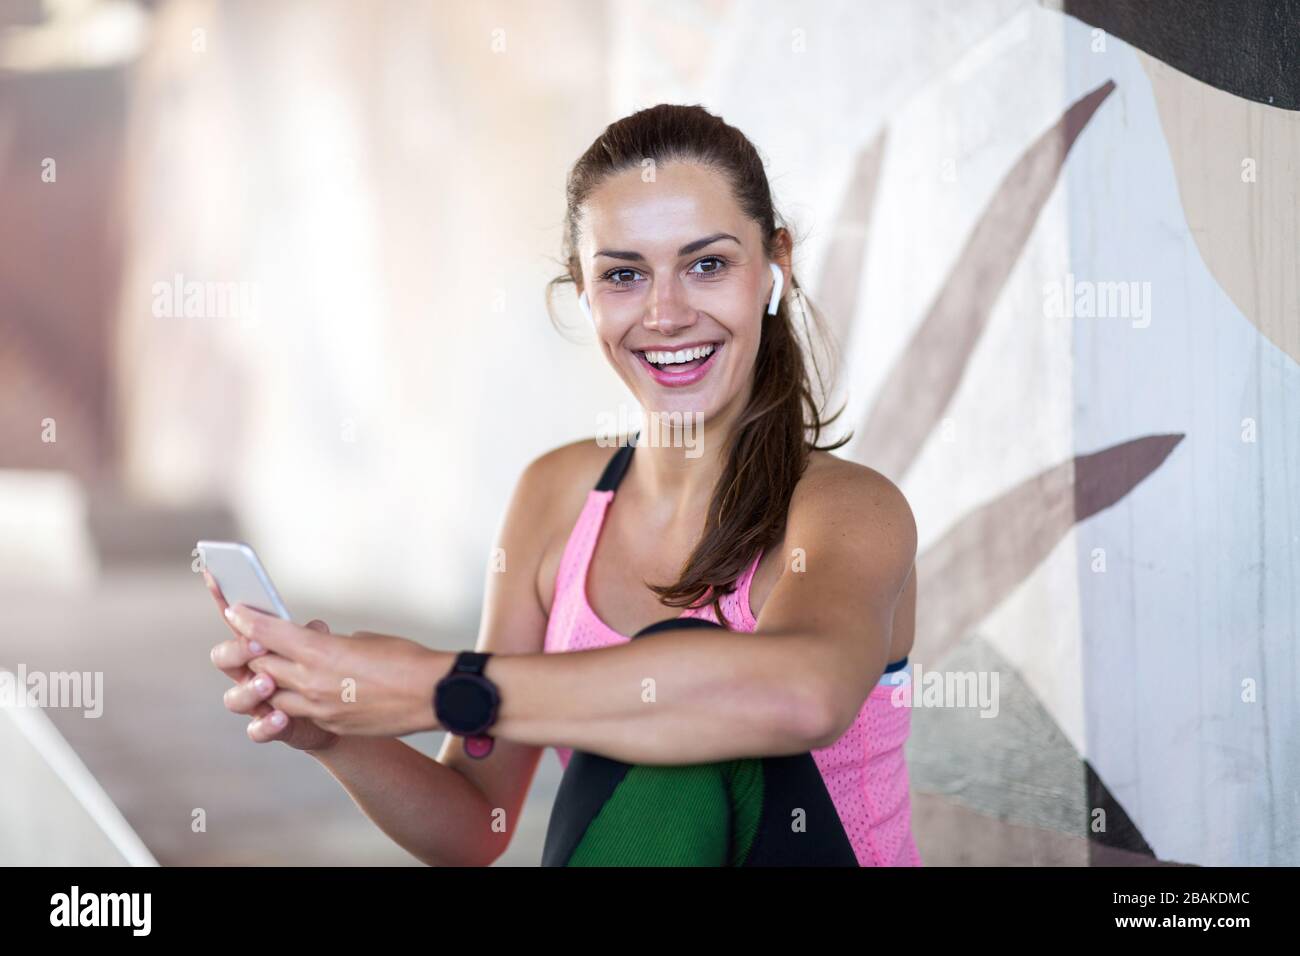 Young woman doing fitness exercise in urban area Stock Photo